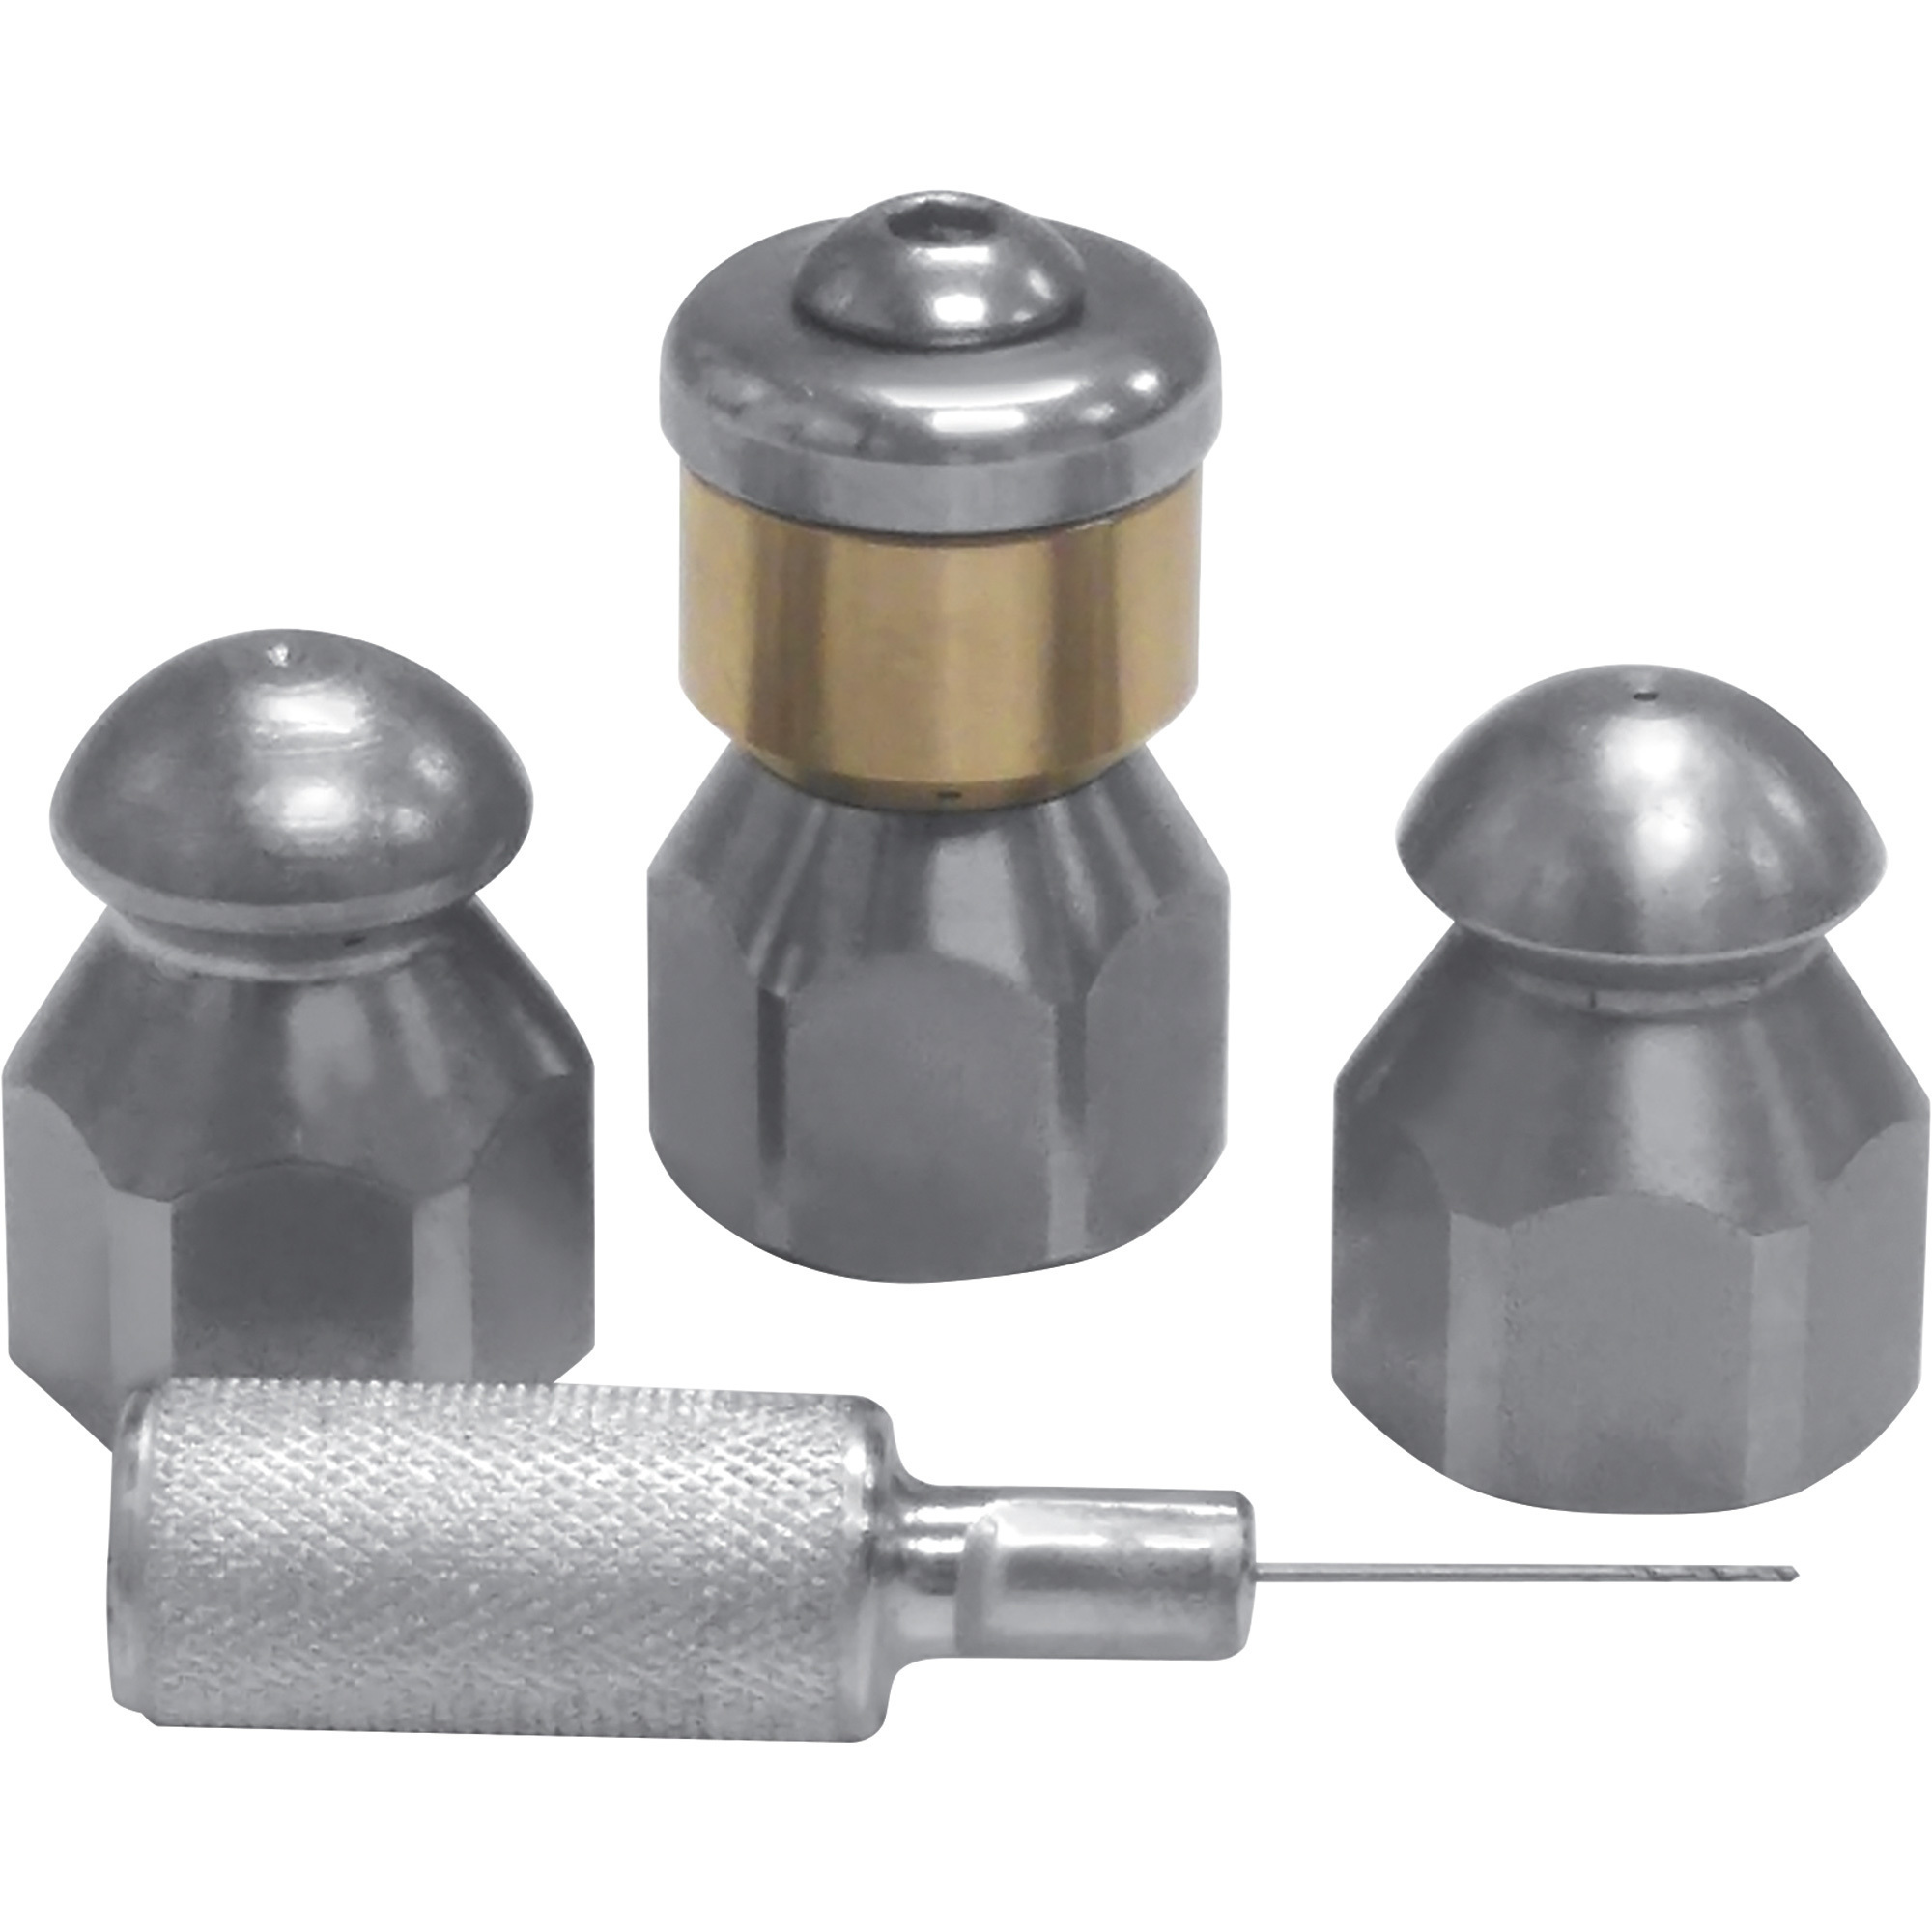 DTE Economy Sewer Jetting Nozzle Kit, 4-Piece, 1/4Inch